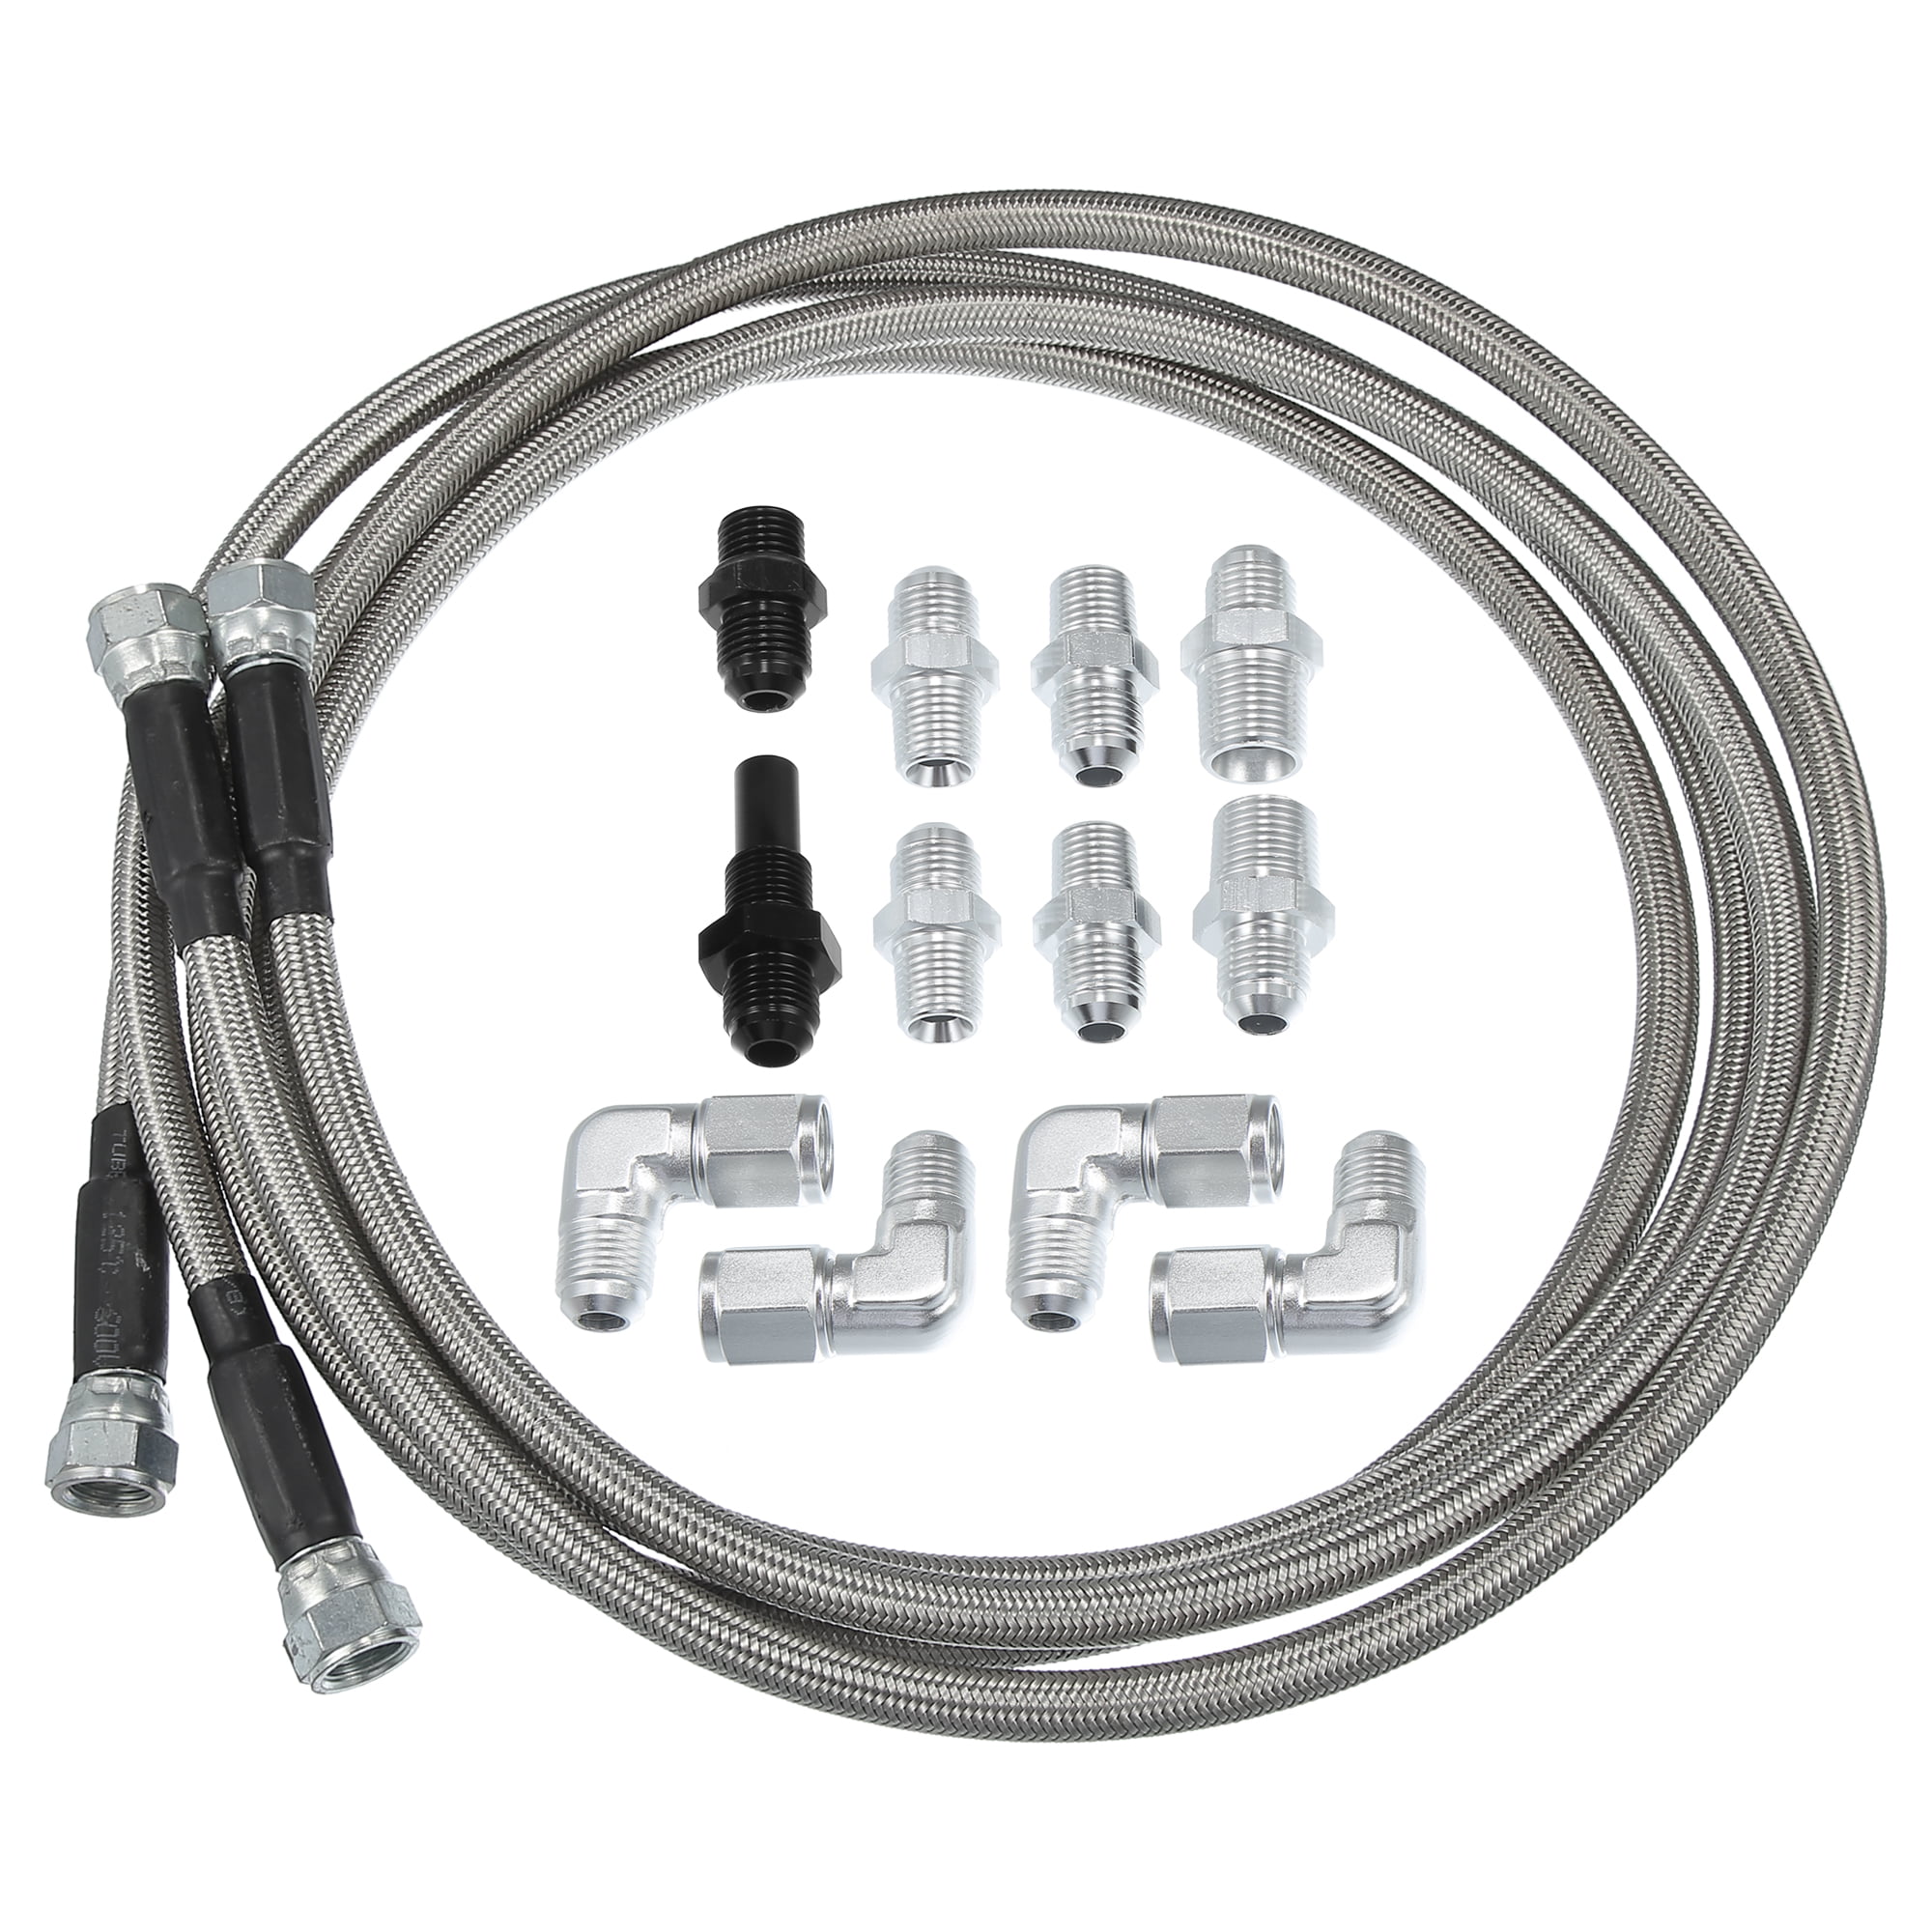 Universal AN-6 Fuel Line Kit Braided Oil Fuel Line Hose Stainless